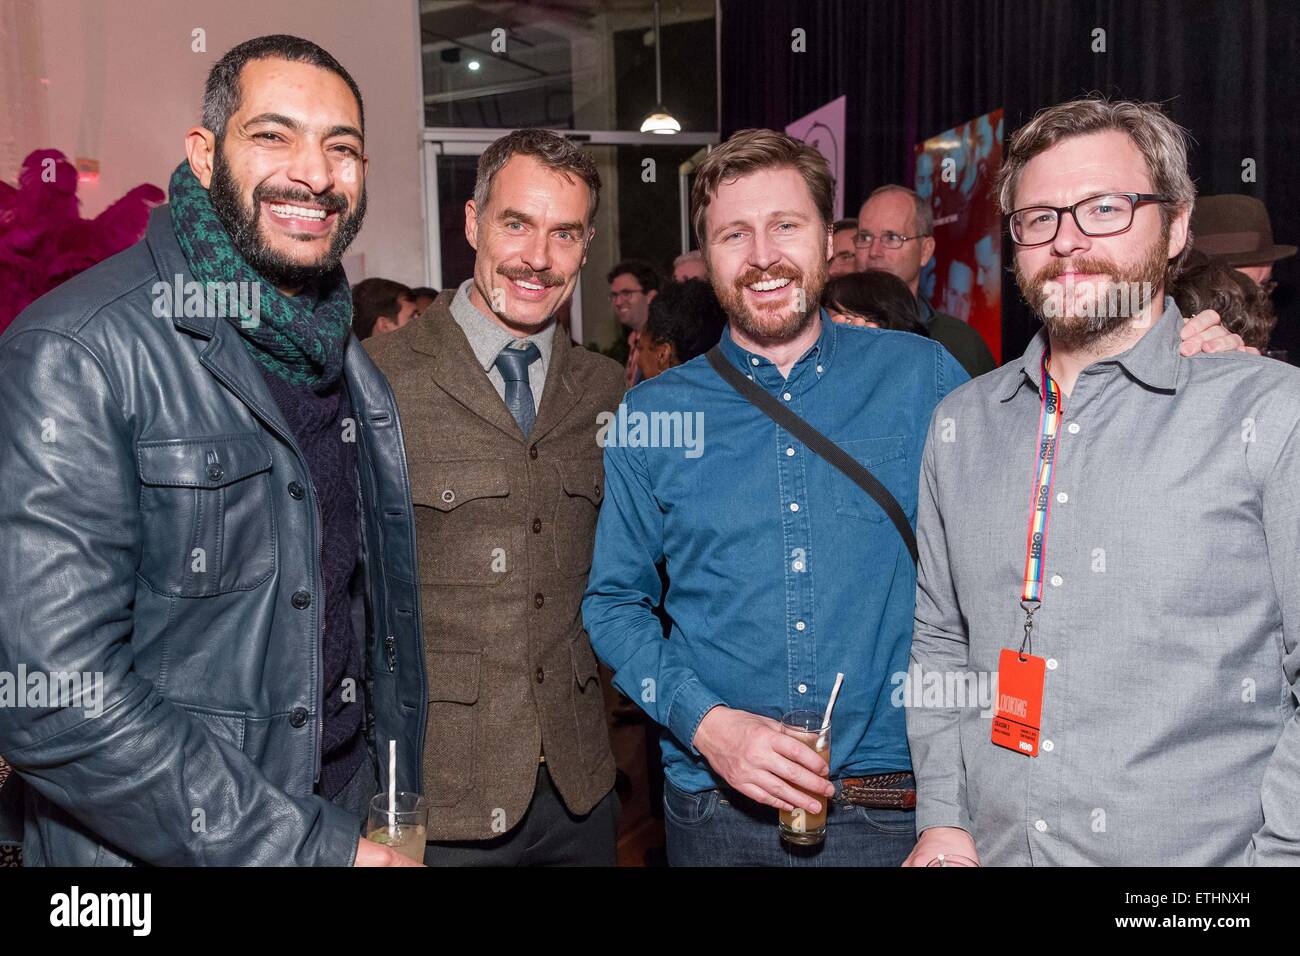 HBO presents the world premiere of ‘Looking' - Arrivals  Featuring: Ahmed Ibrahim, Murray Bartlett, Andrew Haigh, Andy Morwood Where: San Francisco, California, United States When: 07 Jan 2015 Credit: Drew Altizer/WENN.com Stock Photo